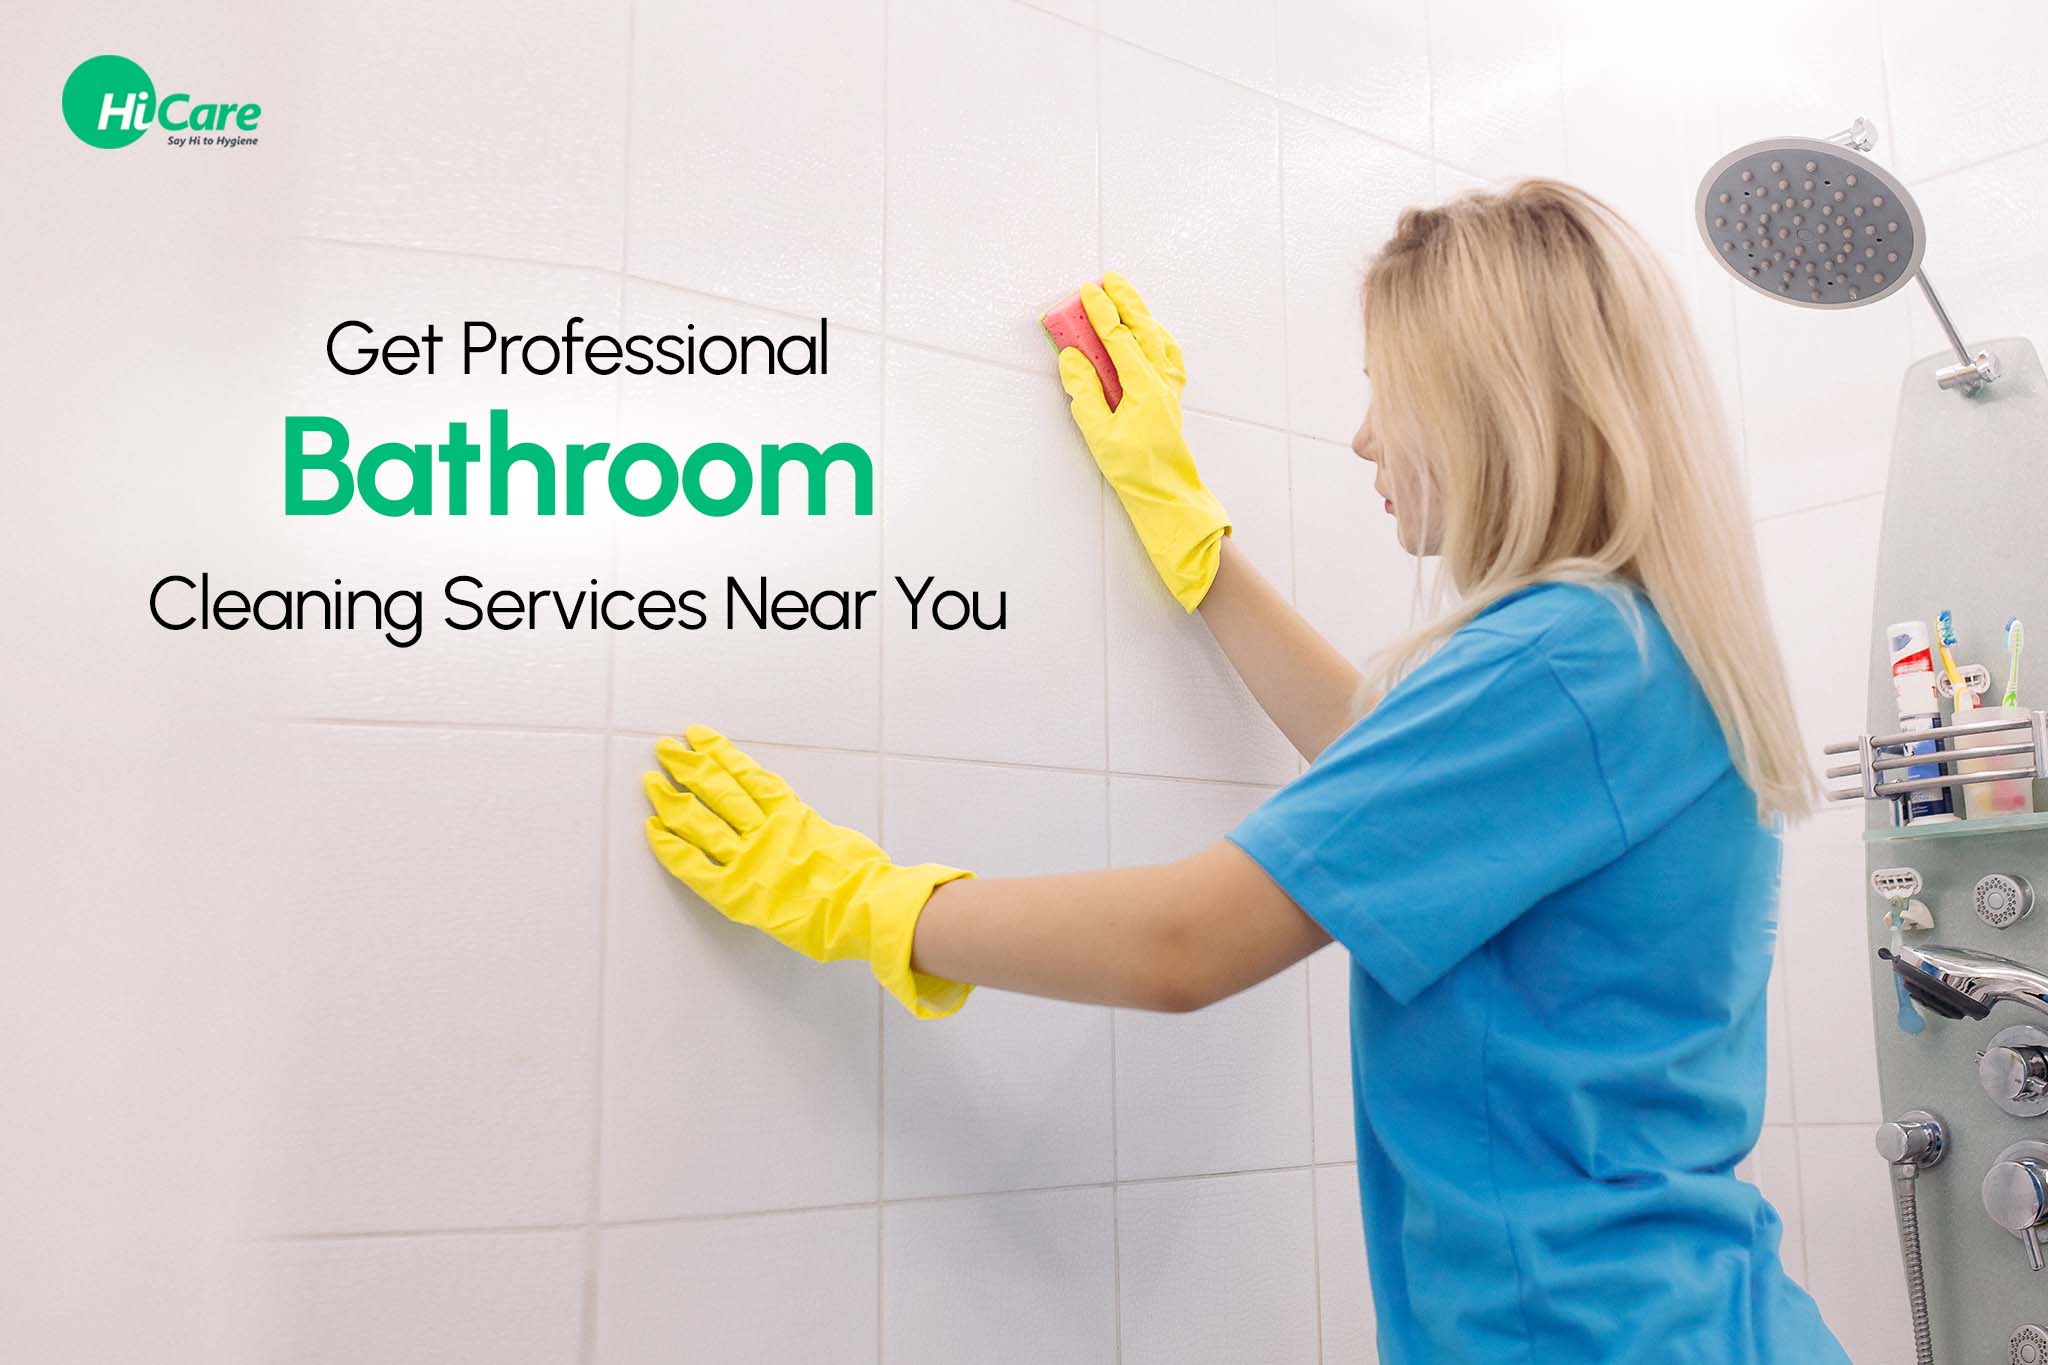 Get Professional Bathroom Cleaning Services Near You